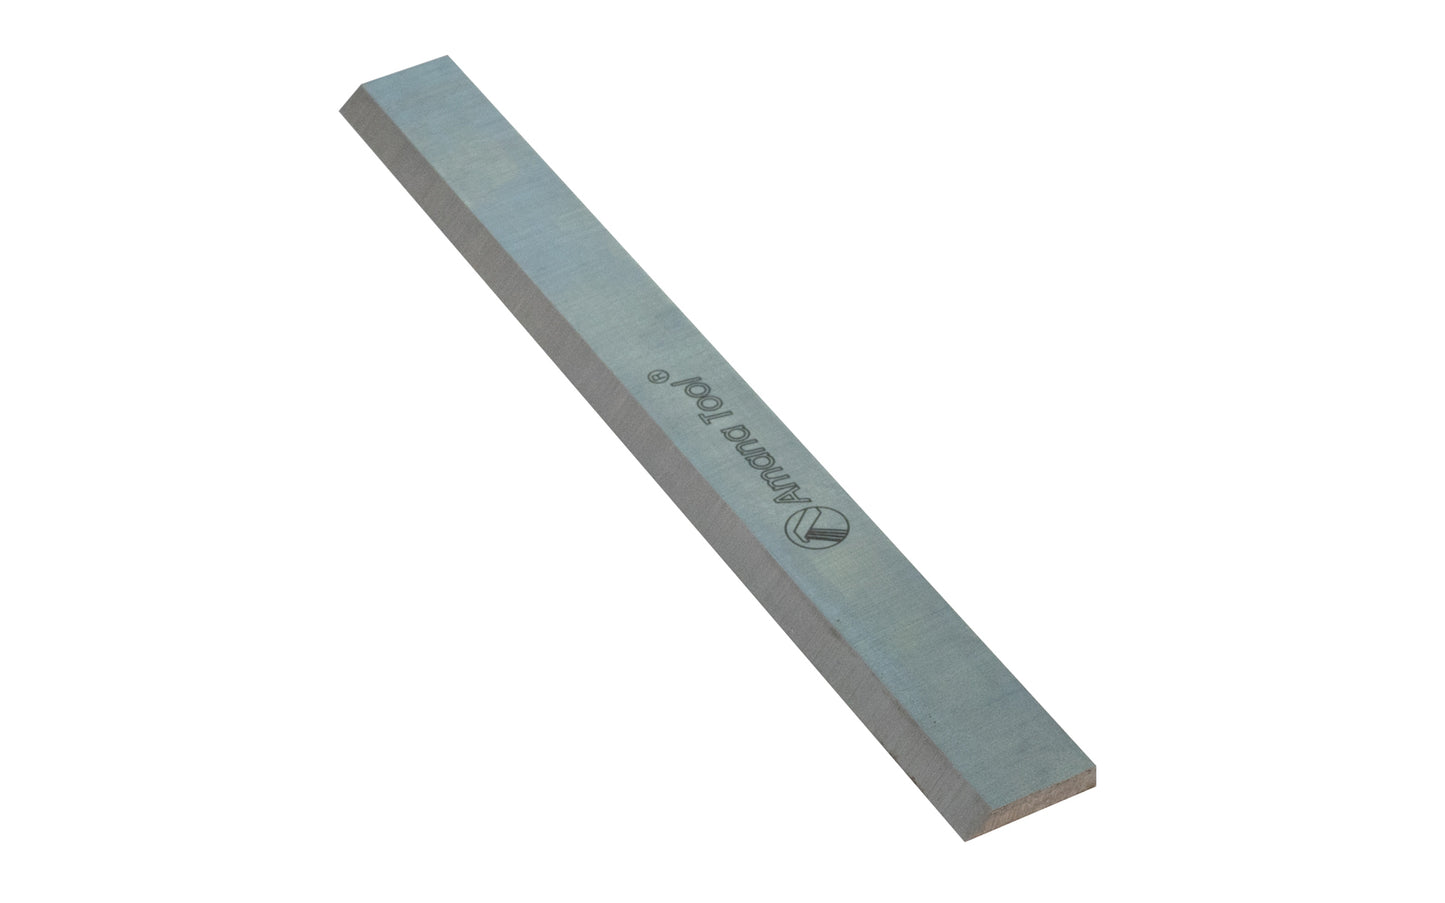 Amana Tool 8" Long, 3/4" Wide, 1/8" Thick Planer Blades - 3 Pack. High speed steel with 18% tungsten. Amana Model P290. 738685712900